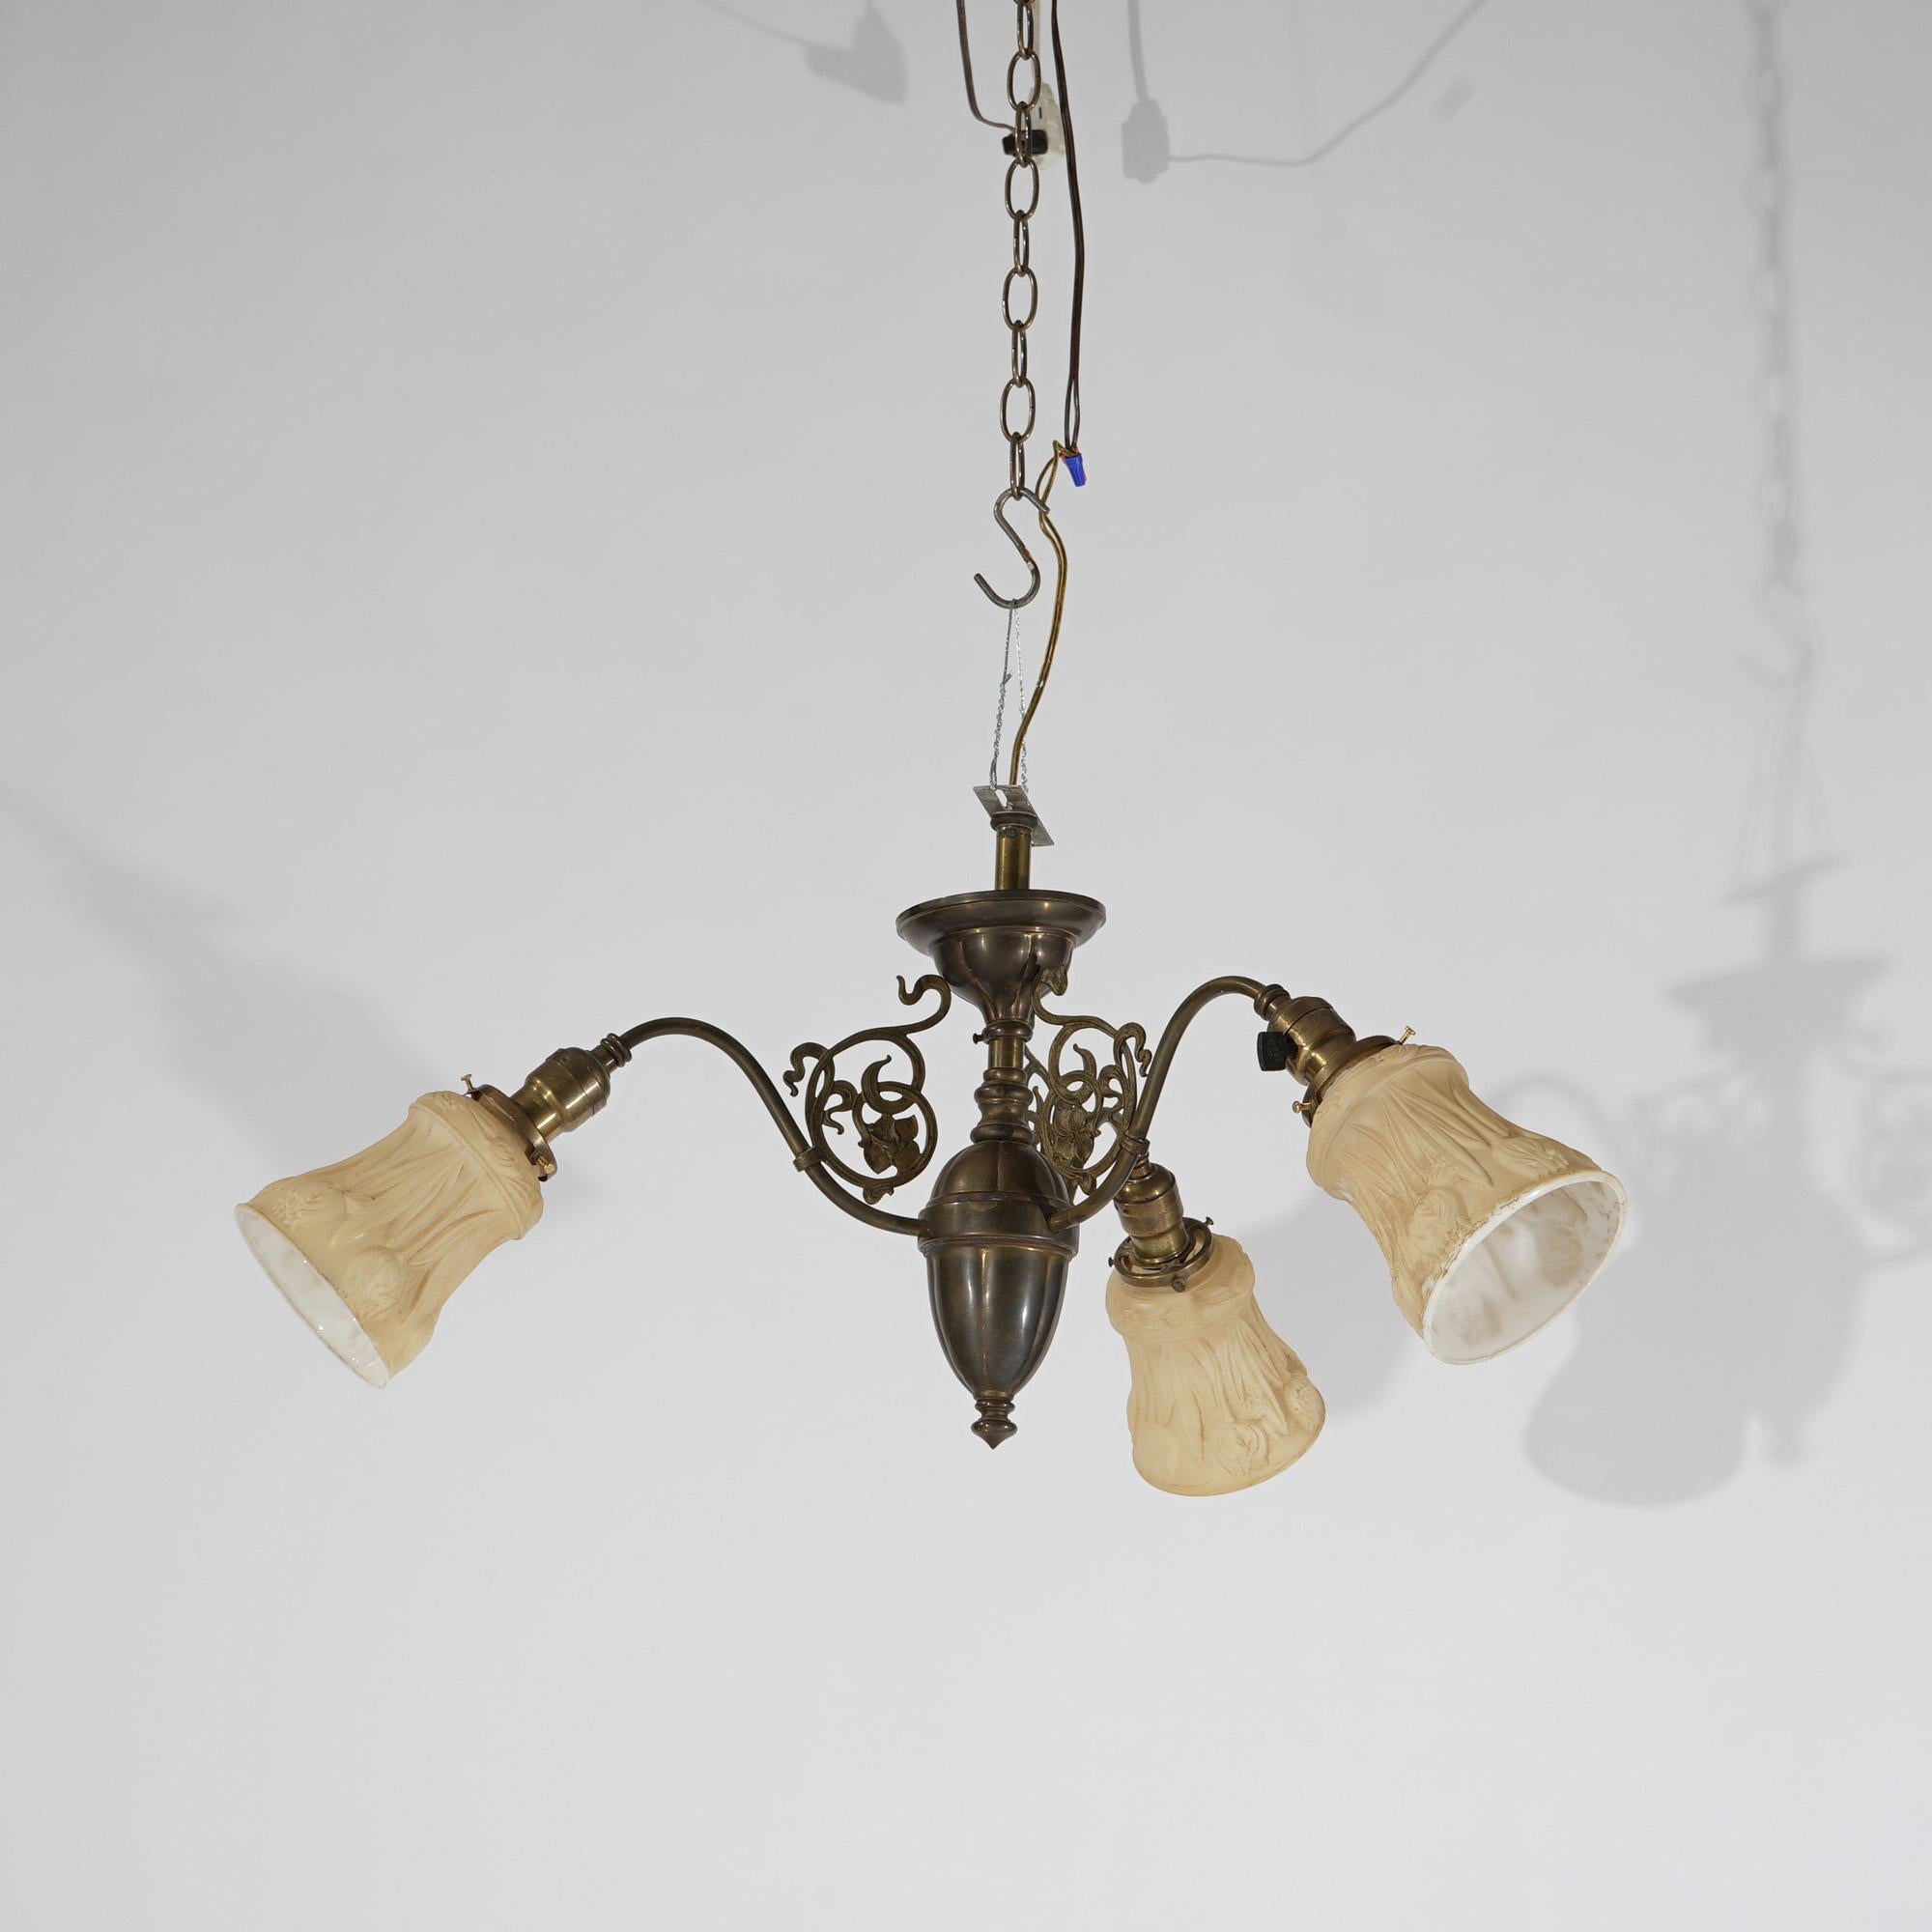 An antique Arts and Crafts chandelier offers brass frame with urn form font having three scroll form arms terminating in art glass shades, c1920

Measures - 20